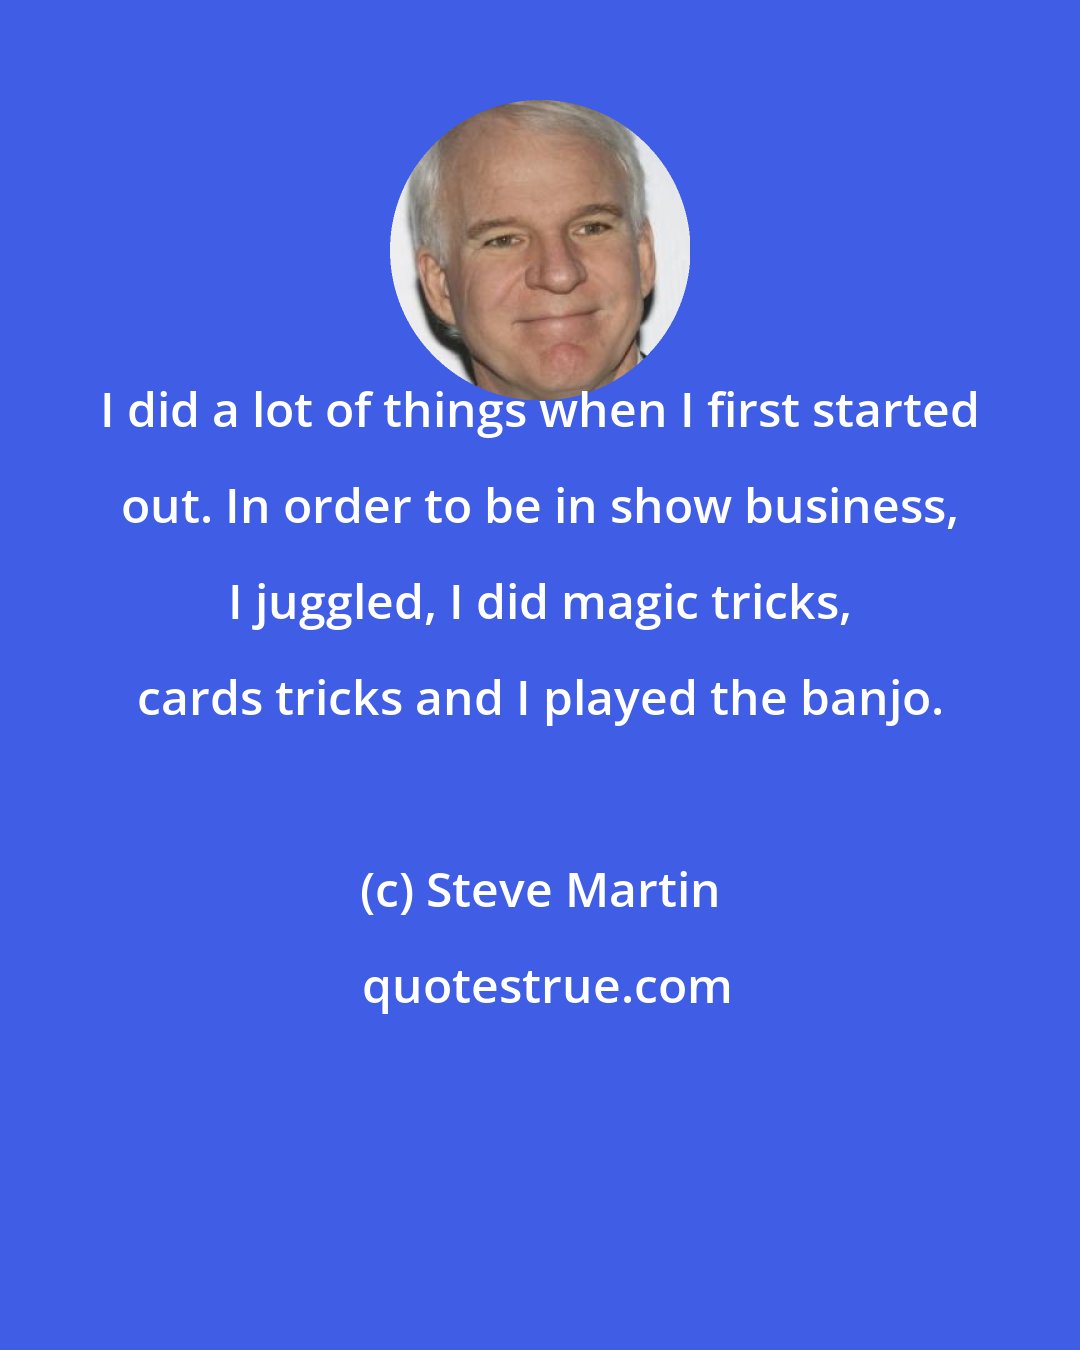 Steve Martin: I did a lot of things when I first started out. In order to be in show business, I juggled, I did magic tricks, cards tricks and I played the banjo.